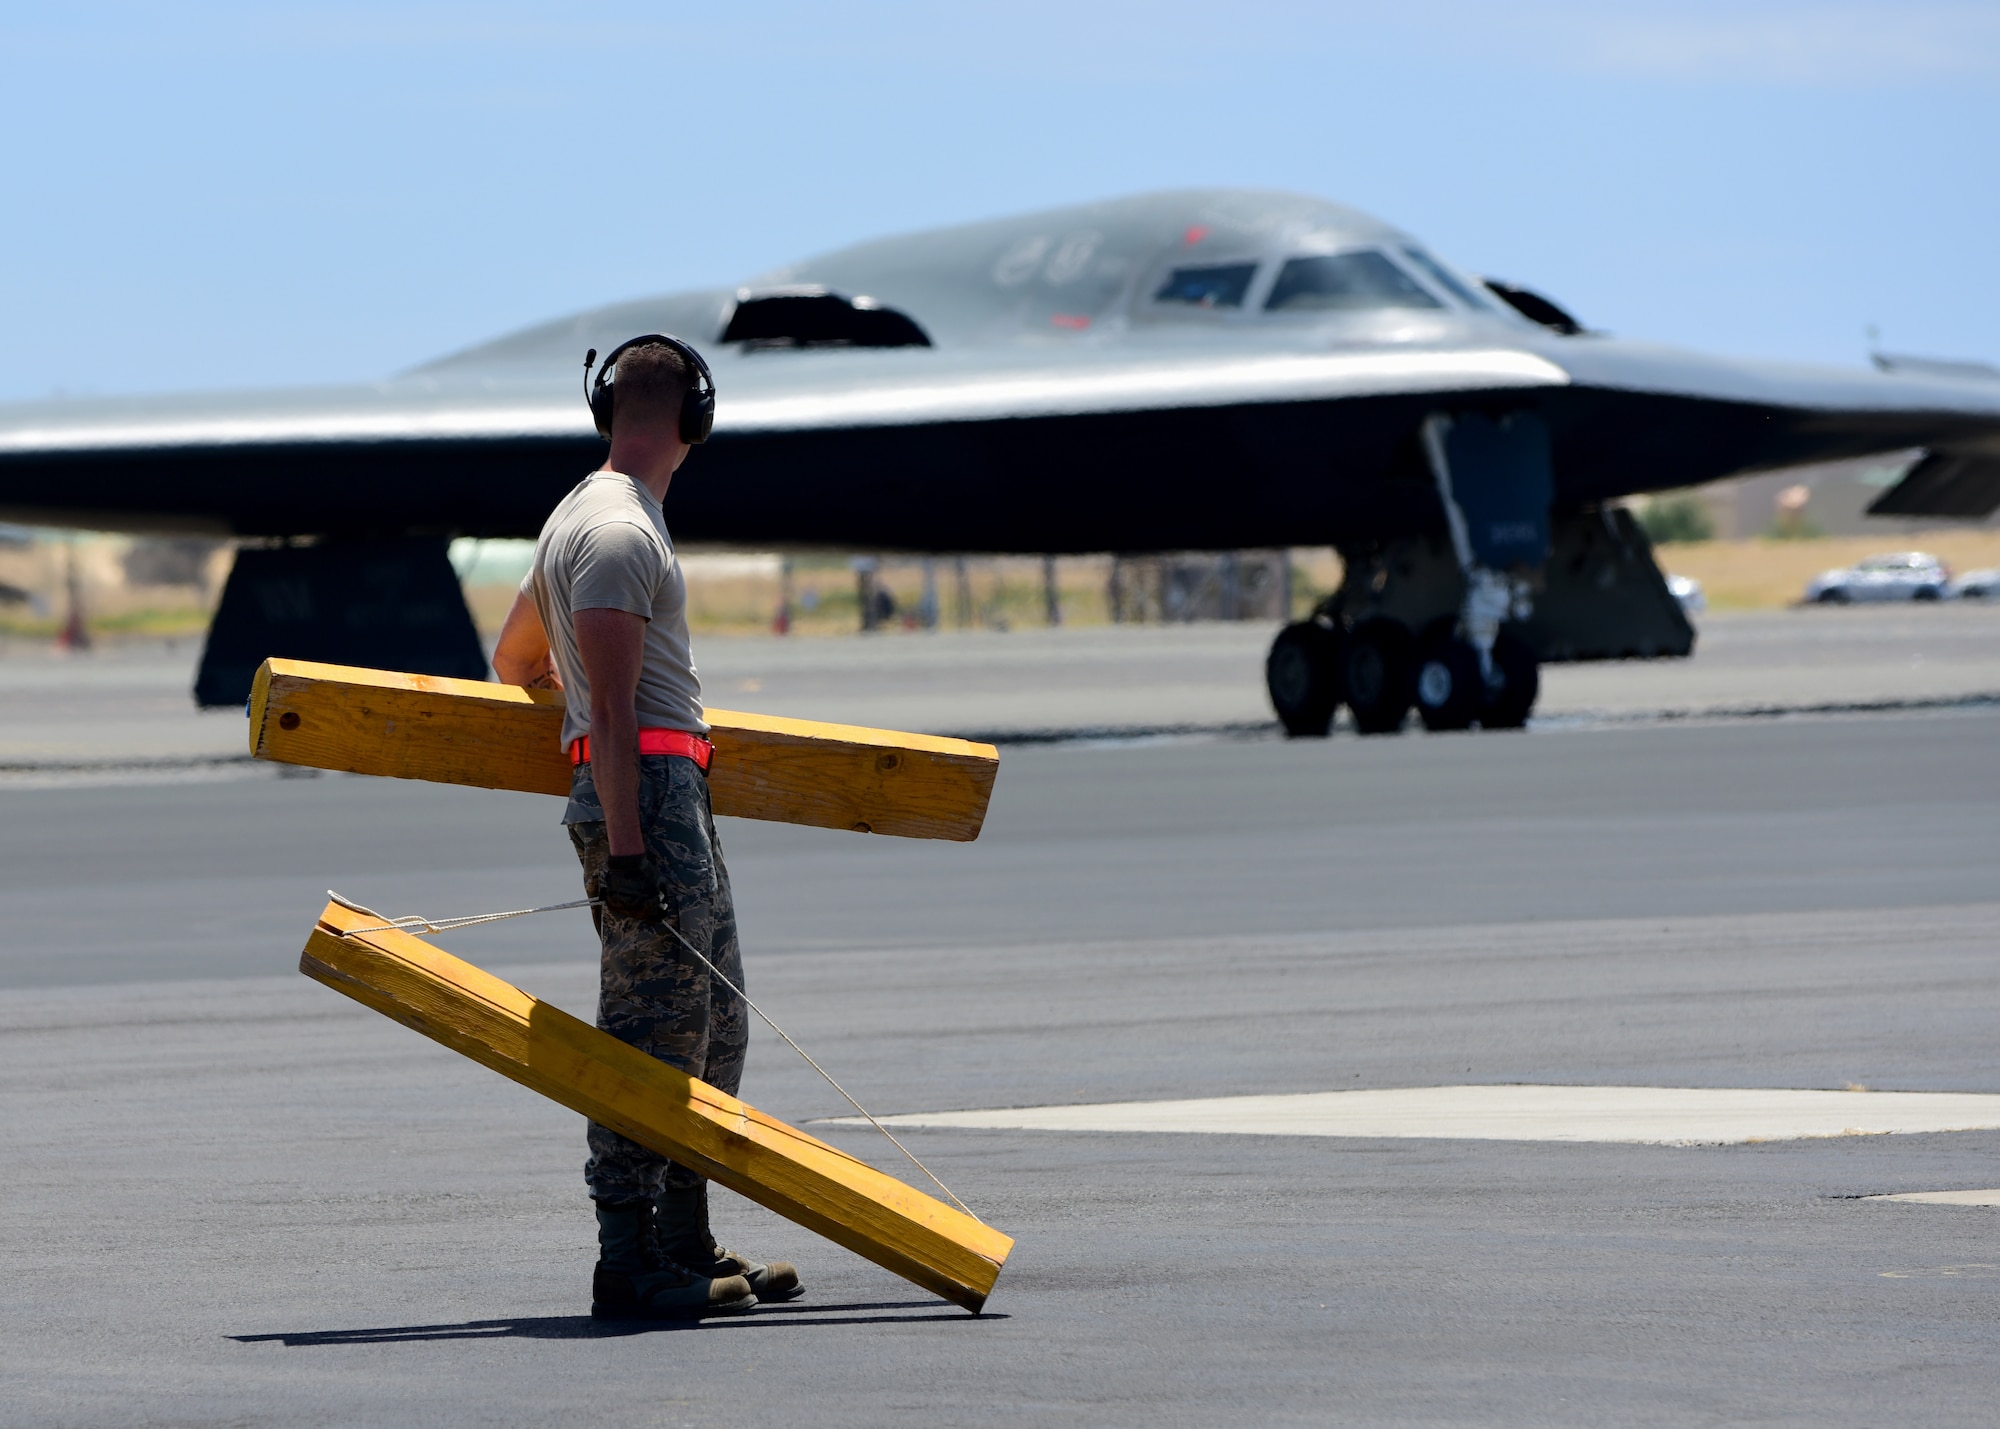 A U.S. Air Force maintenance technician from Whiteman Air Force Base, Missouri, prepares to place wheel chocks on a B-2 Spirit at Joint Base Pearl Harbor-Hickam, Hawaii, Aug. 15, 2018. B-2s regularly rotate through the Indo-Pacific to conduct routine air operations, which integrate capabilities with key regional partners and demonstrate U.S. commitment to peace and stability in the region. These operations are in support of the U.S. Strategic Command’s Bomber Task Force deployment. (U.S. Air Force photo by Staff Sgt. Danielle Quilla)